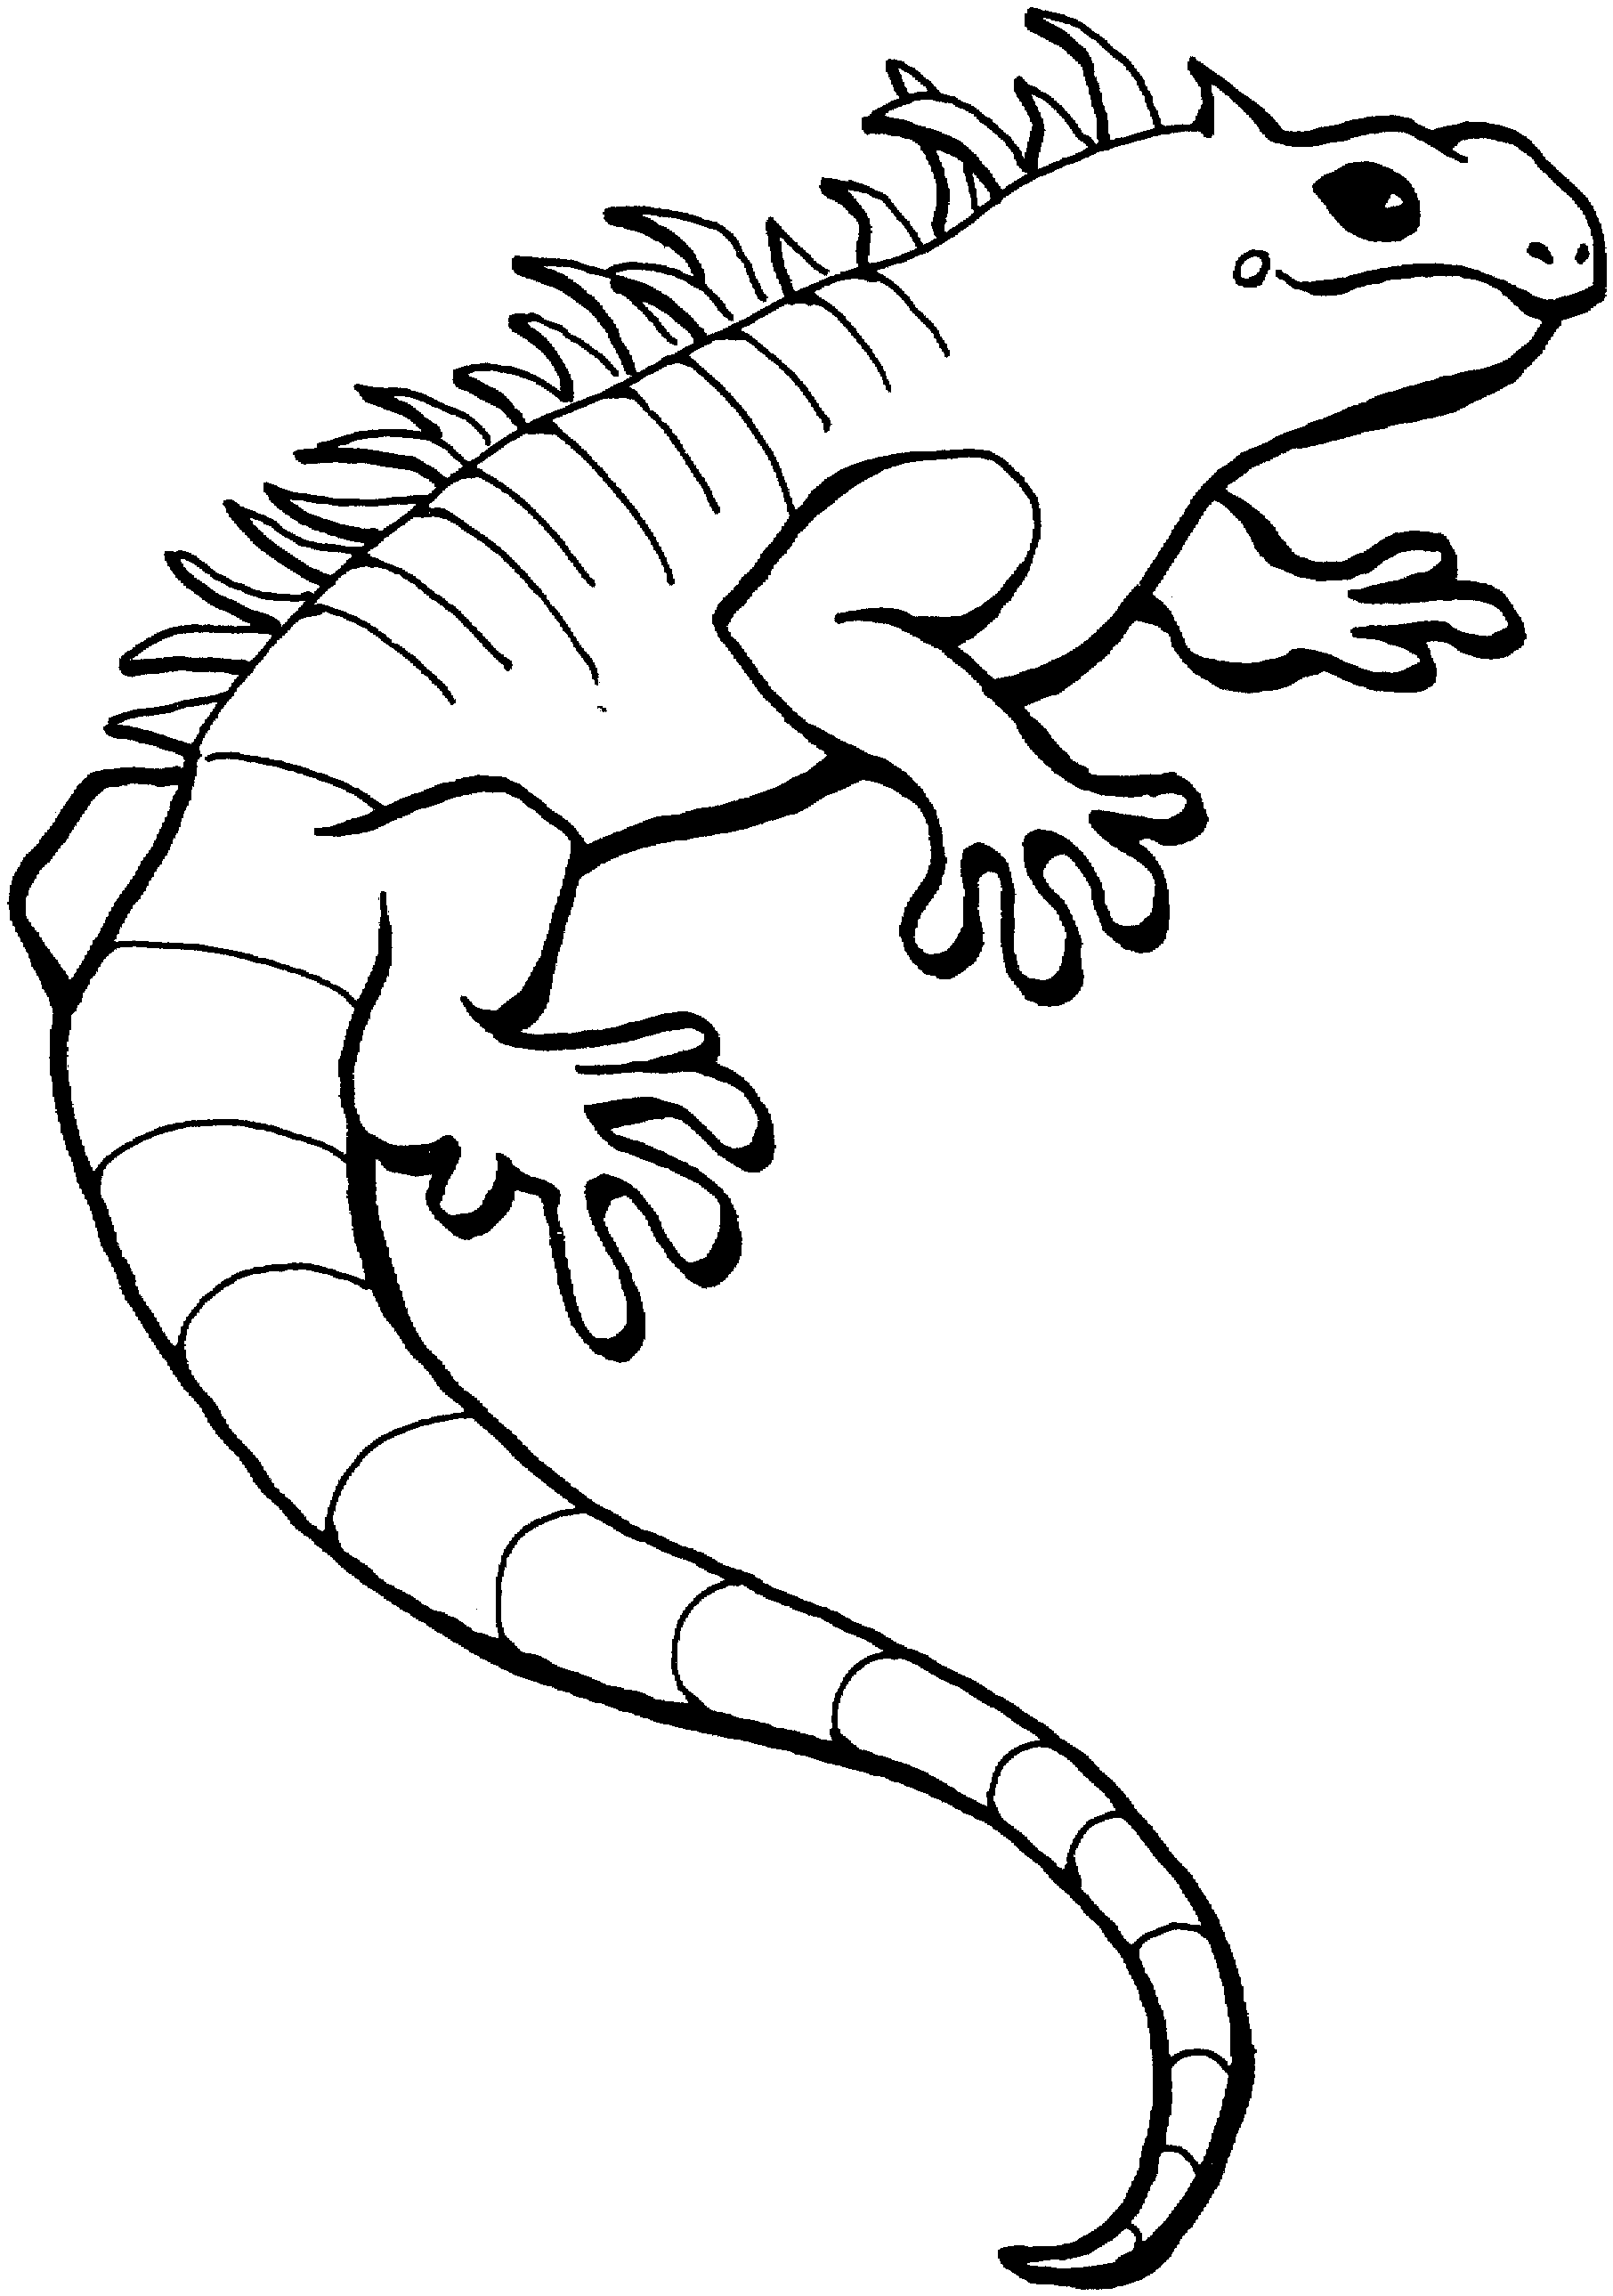 Coloring Pages Of A Lizard Coloring Home